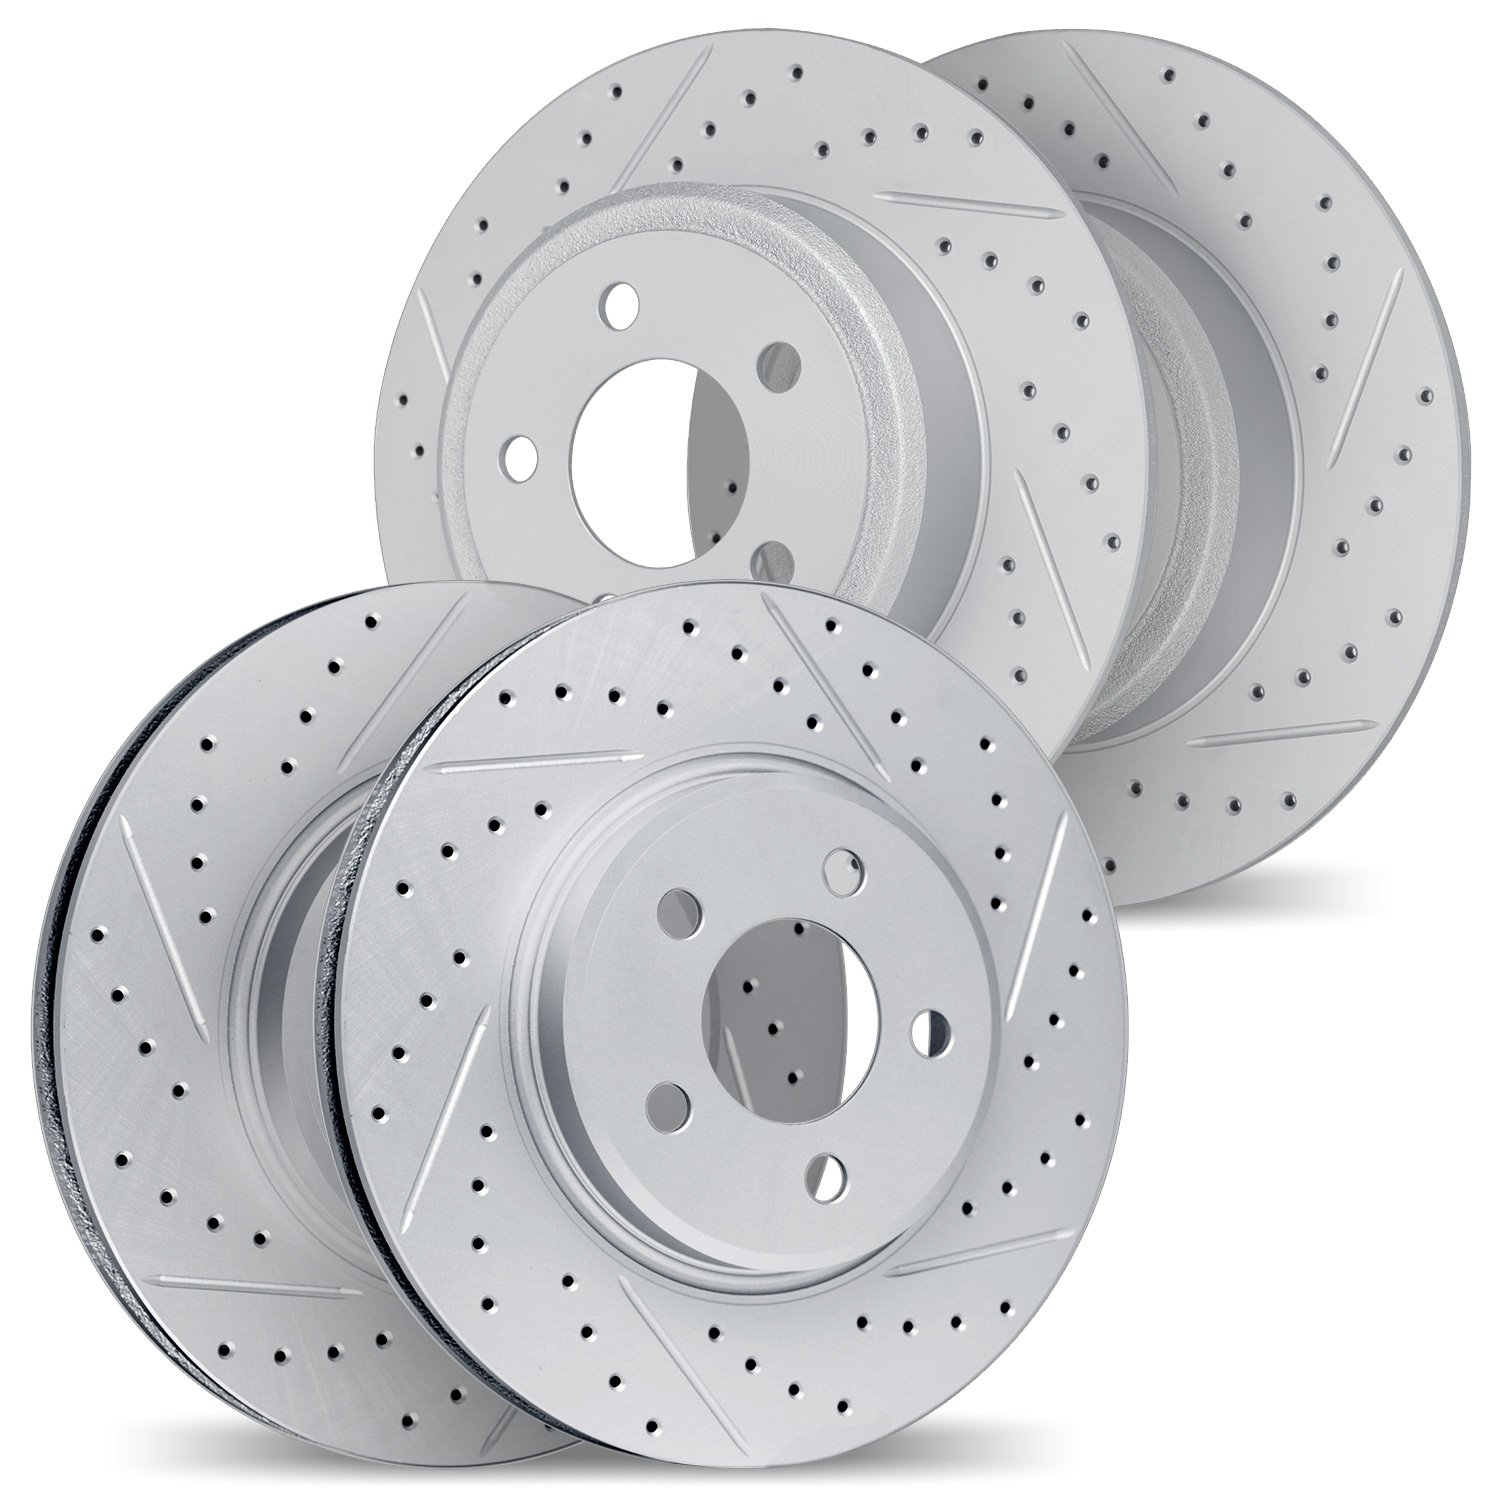 2004-59055 Geoperformance Drilled/Slotted Brake Rotors, 2002-2004 Acura/Honda, Position: Front and Rear